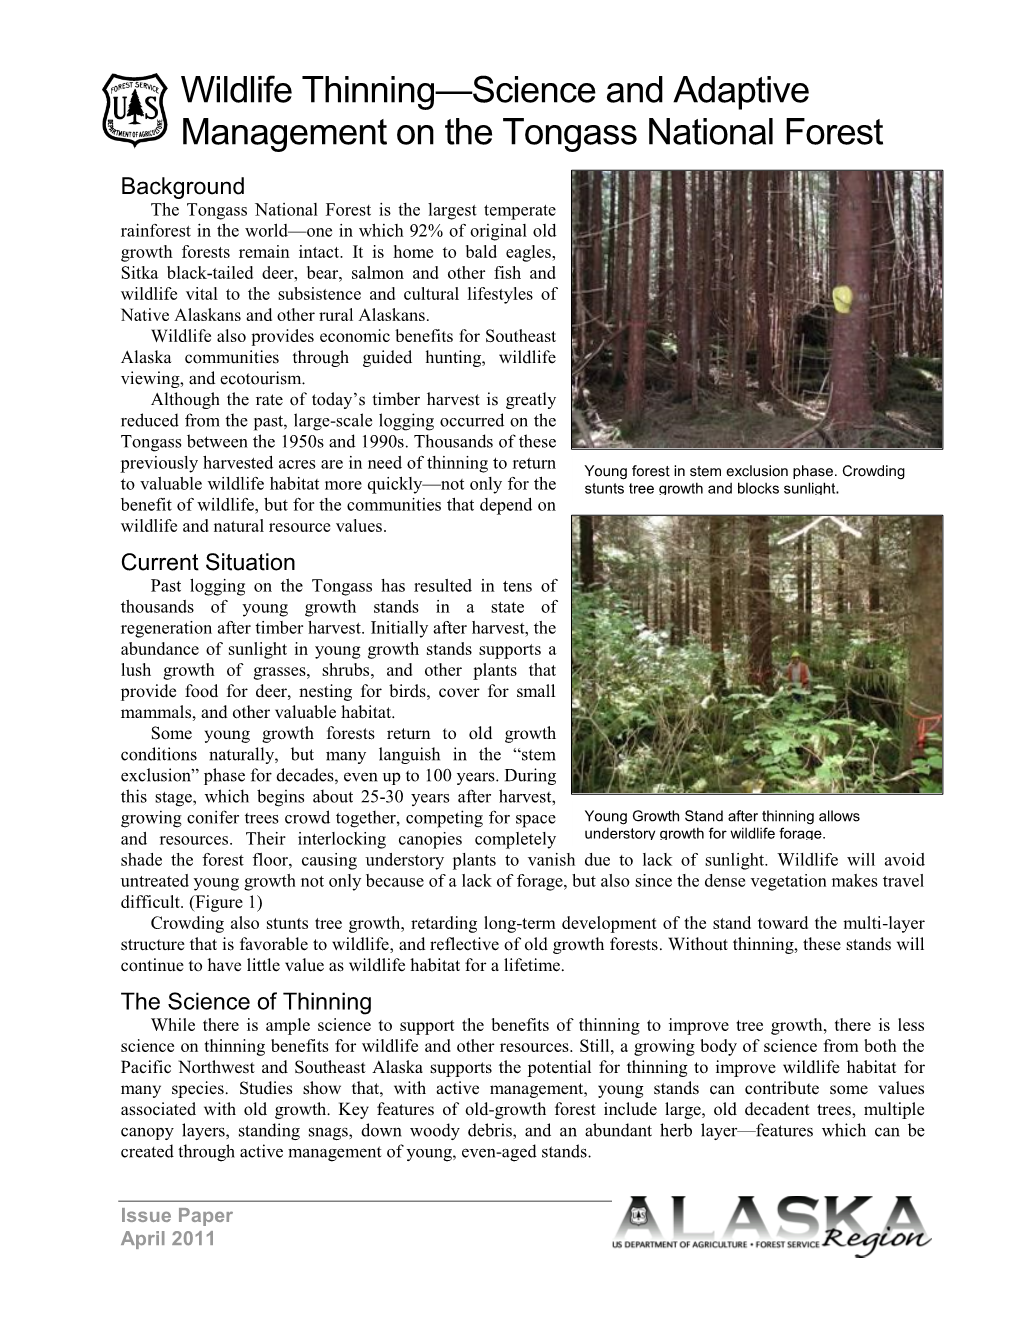 Wildlife Thinning—Science and Adaptive Management on the Tongass National Forest